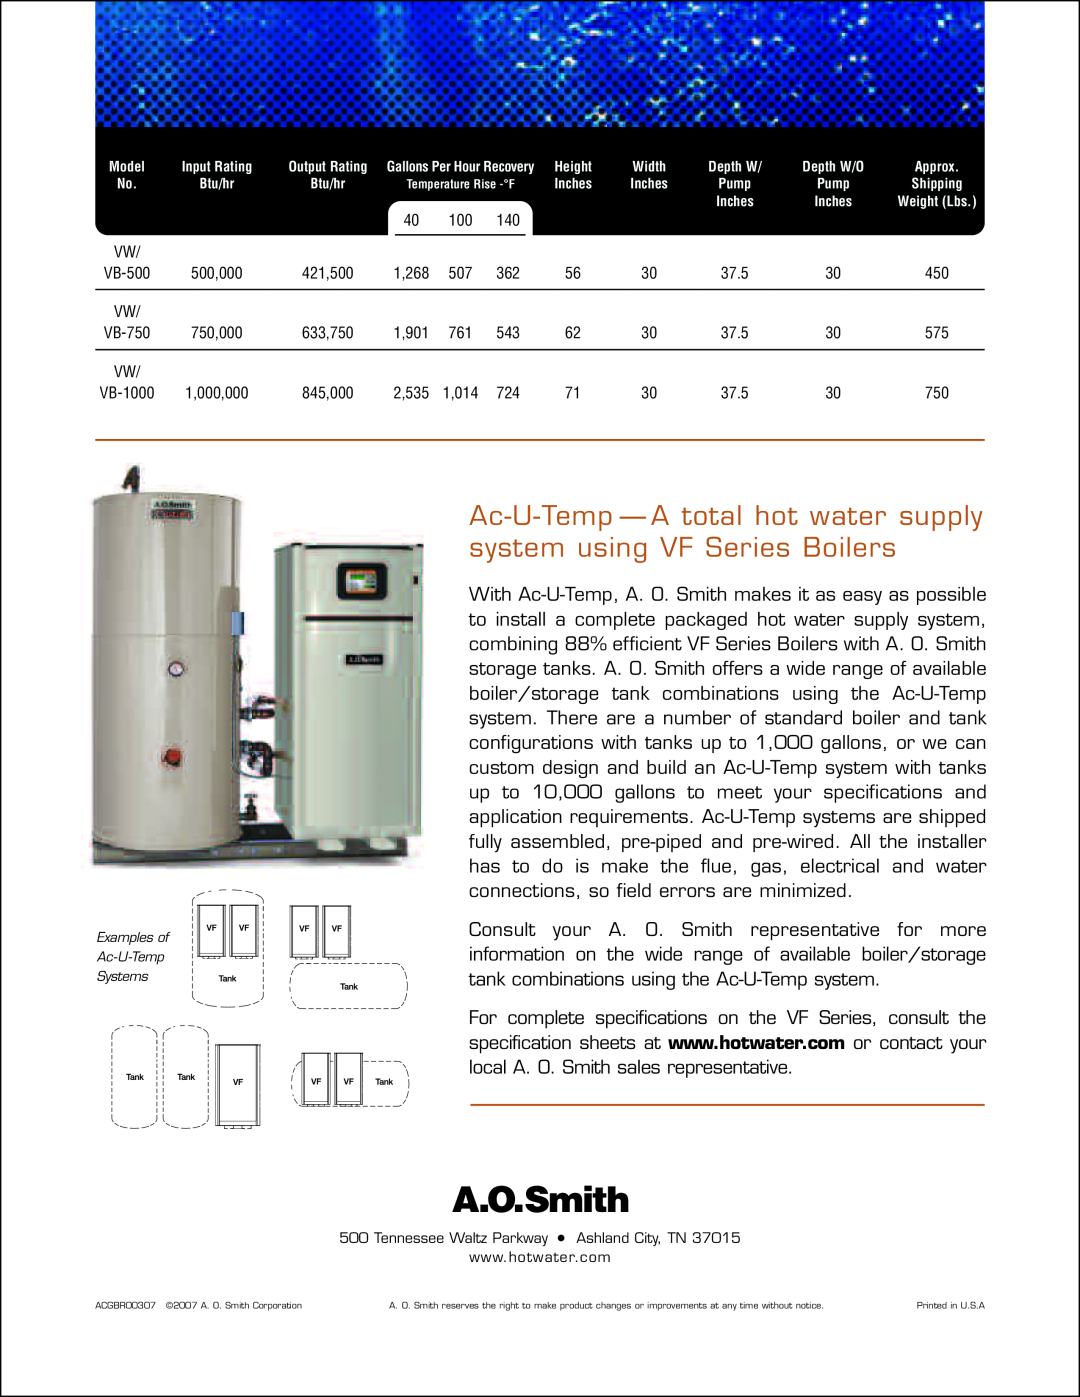 A.O. Smith manual Ac-U-Temp - A total hot water supply system using VF Series Boilers 